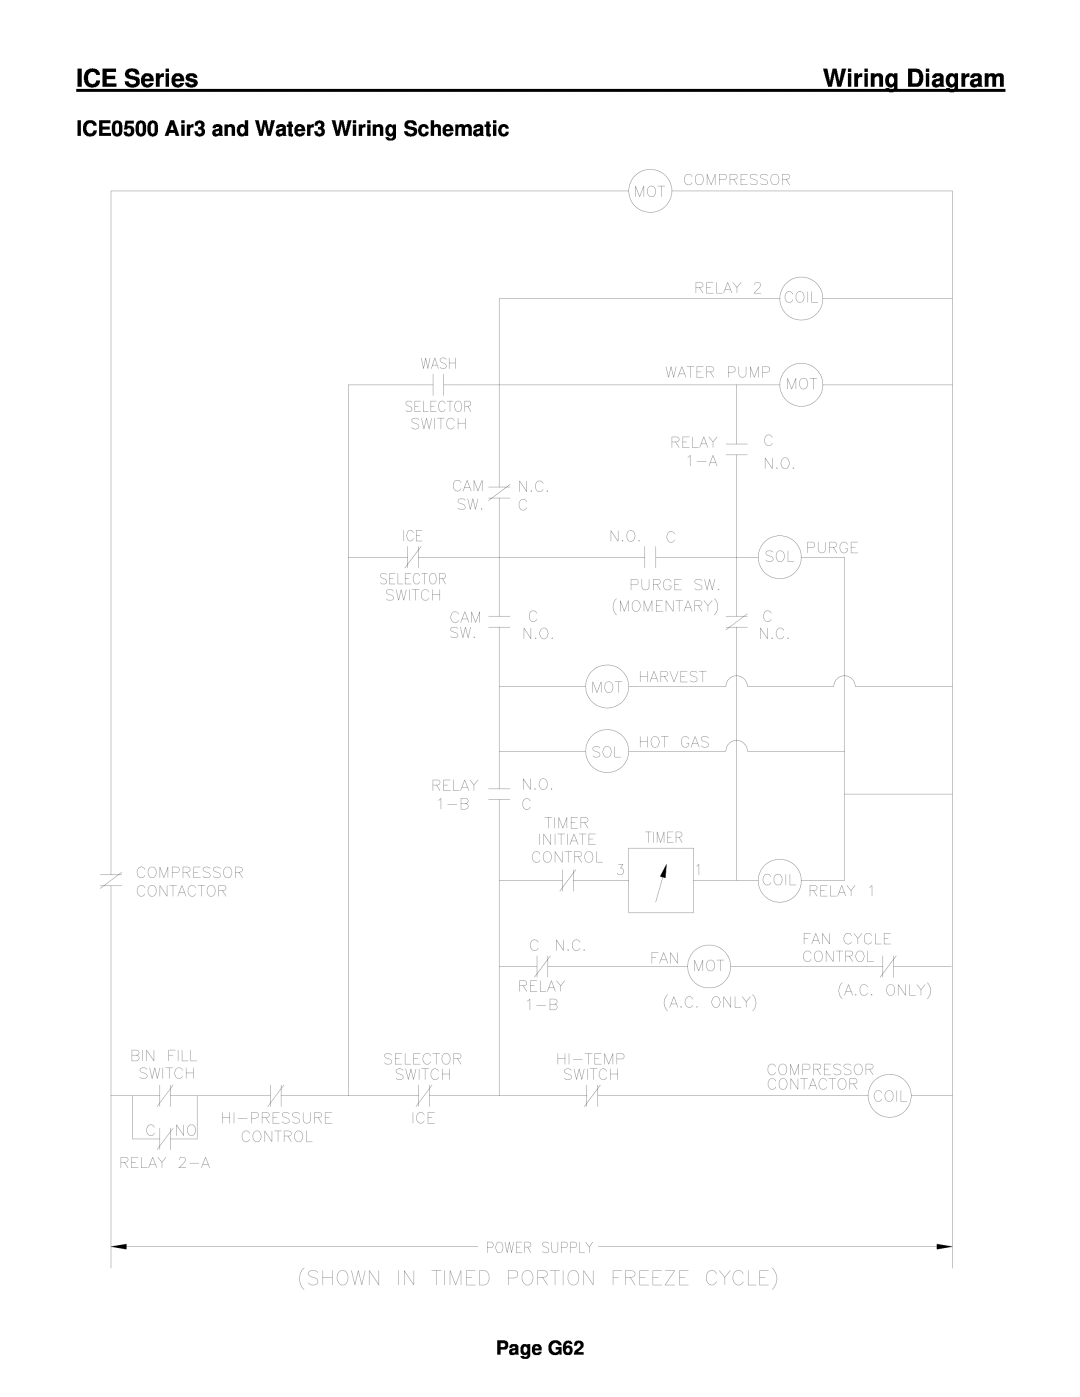 Ice-O-Matic ICE0250 Series ICE0500 Air3 and Water3 Wiring Schematic, ICE Series, Wiring Diagram, Page G62 